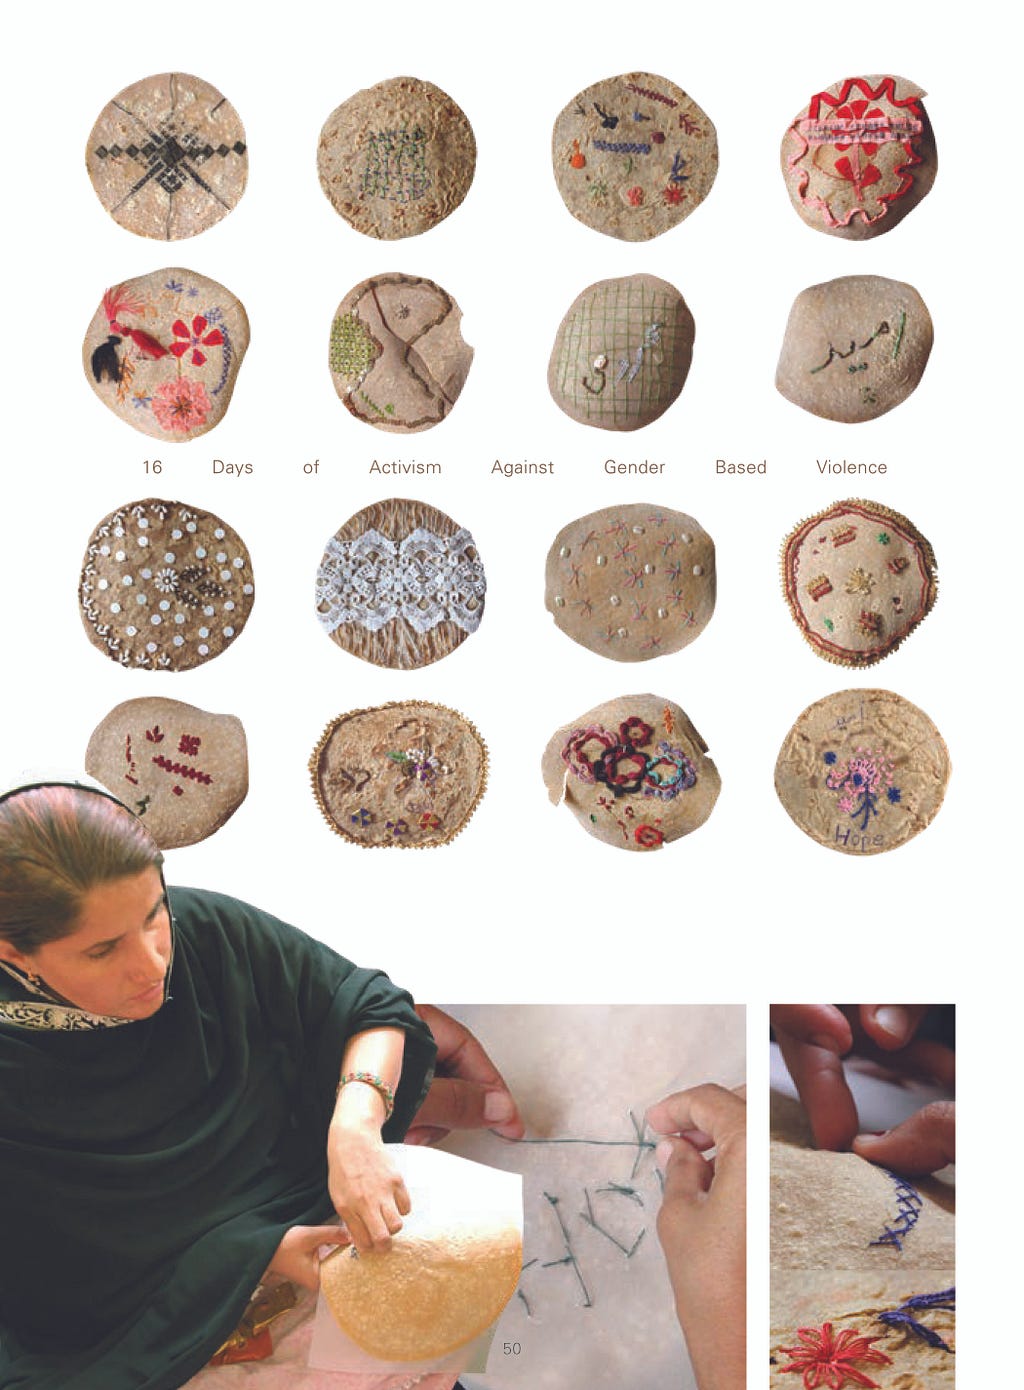 A collage of the various embroidered flatbreads that women made